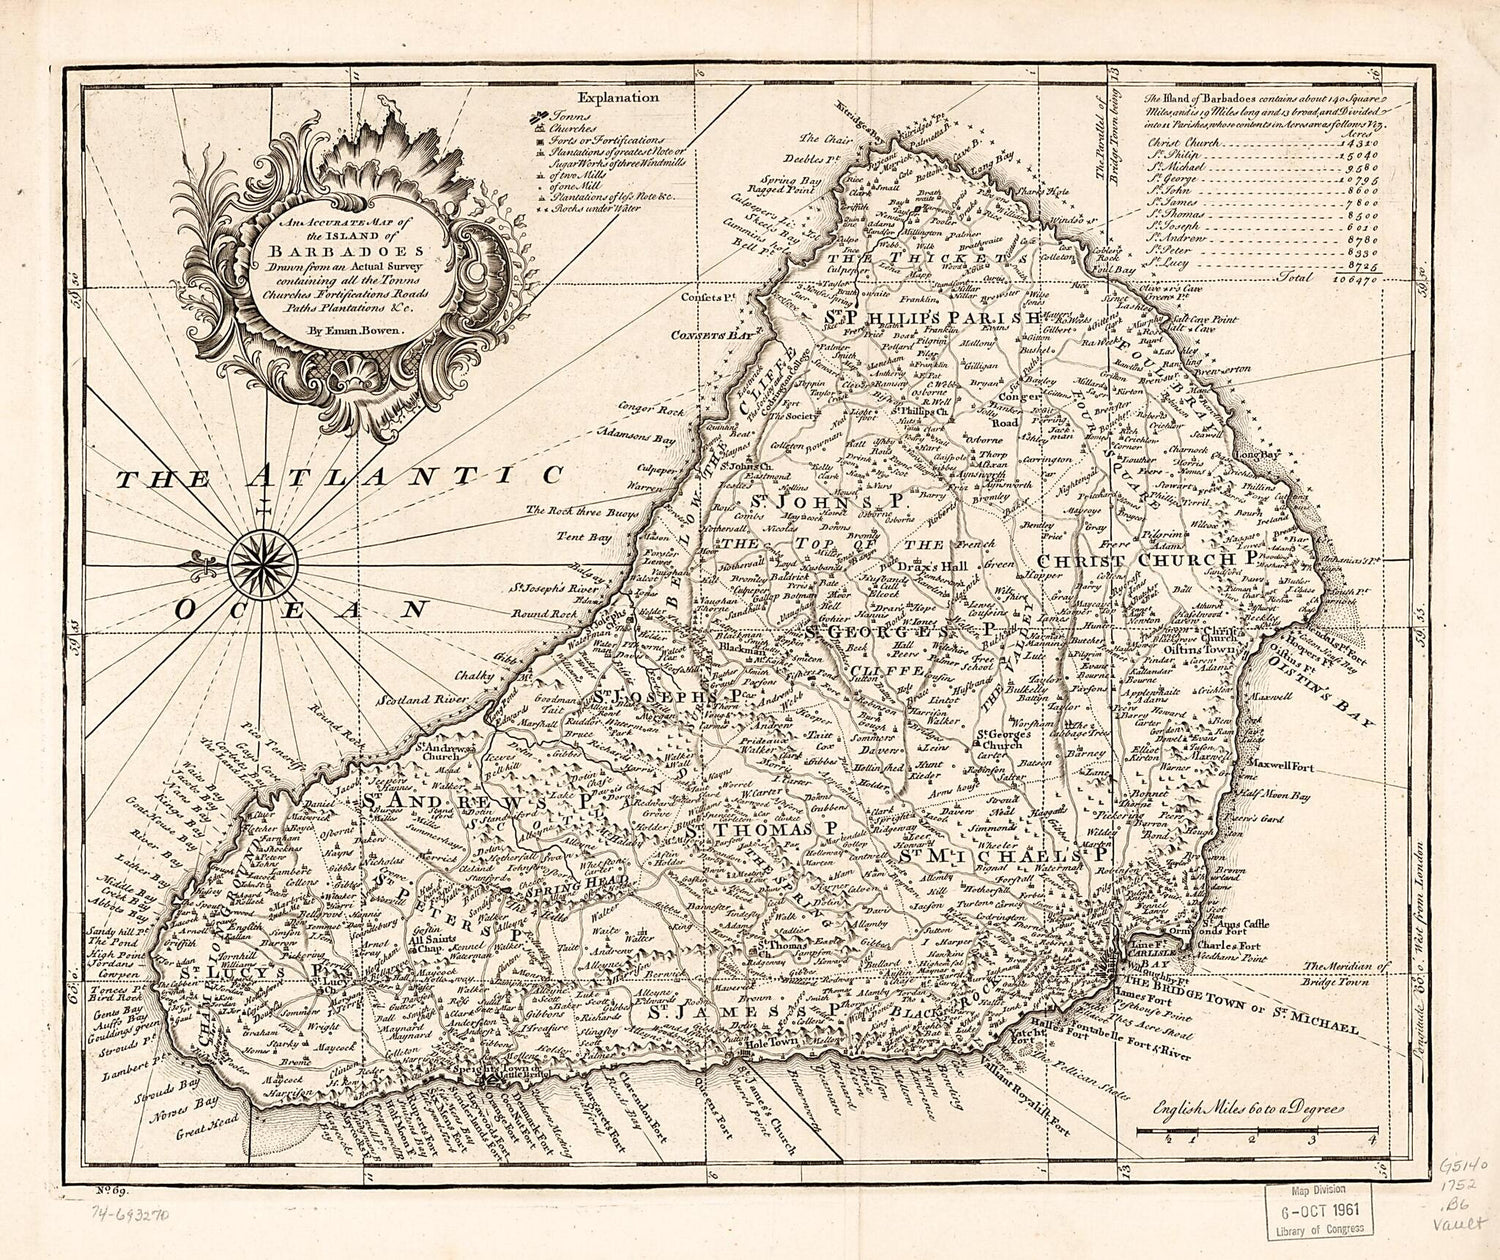 This old map of An Accurate Map of the Island of Barbadoes. Drawn from an Actual Survey Containing All the Towns, Churches, Fortifications, Roads, Paths, Plantations &amp;c from 1752 was created by Emanuel Bowen in 1752